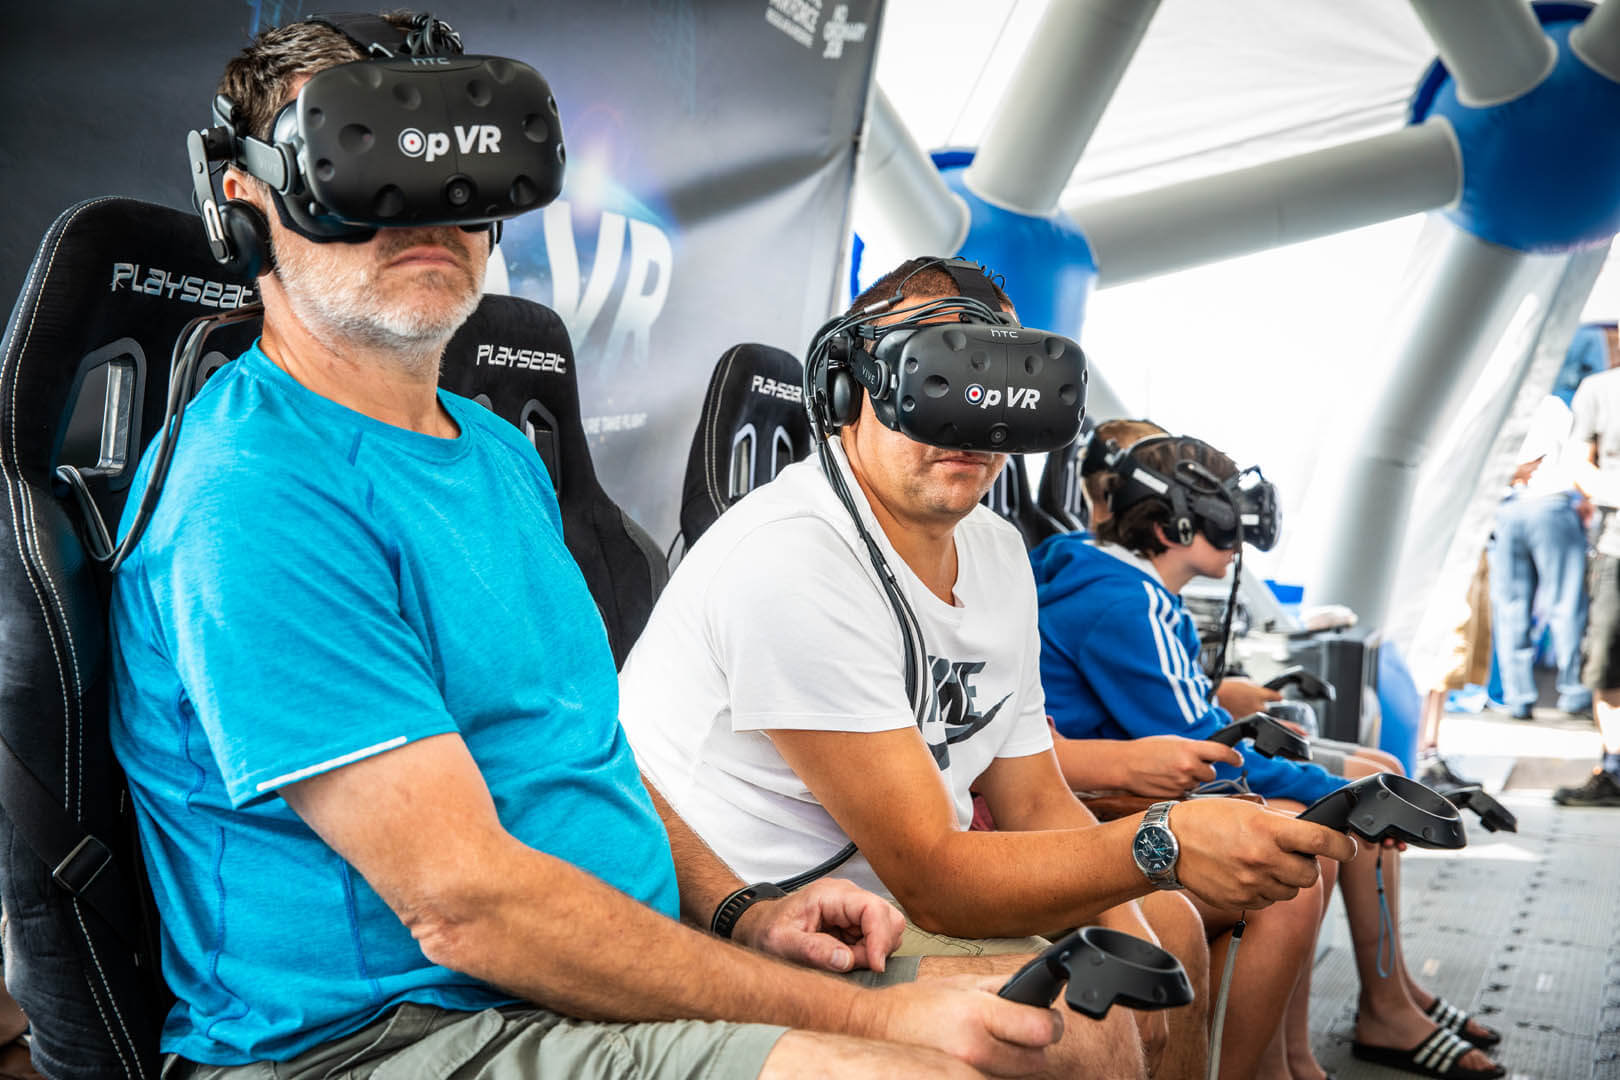 Visitors enjoy a go on the VR headsets at the RAF village